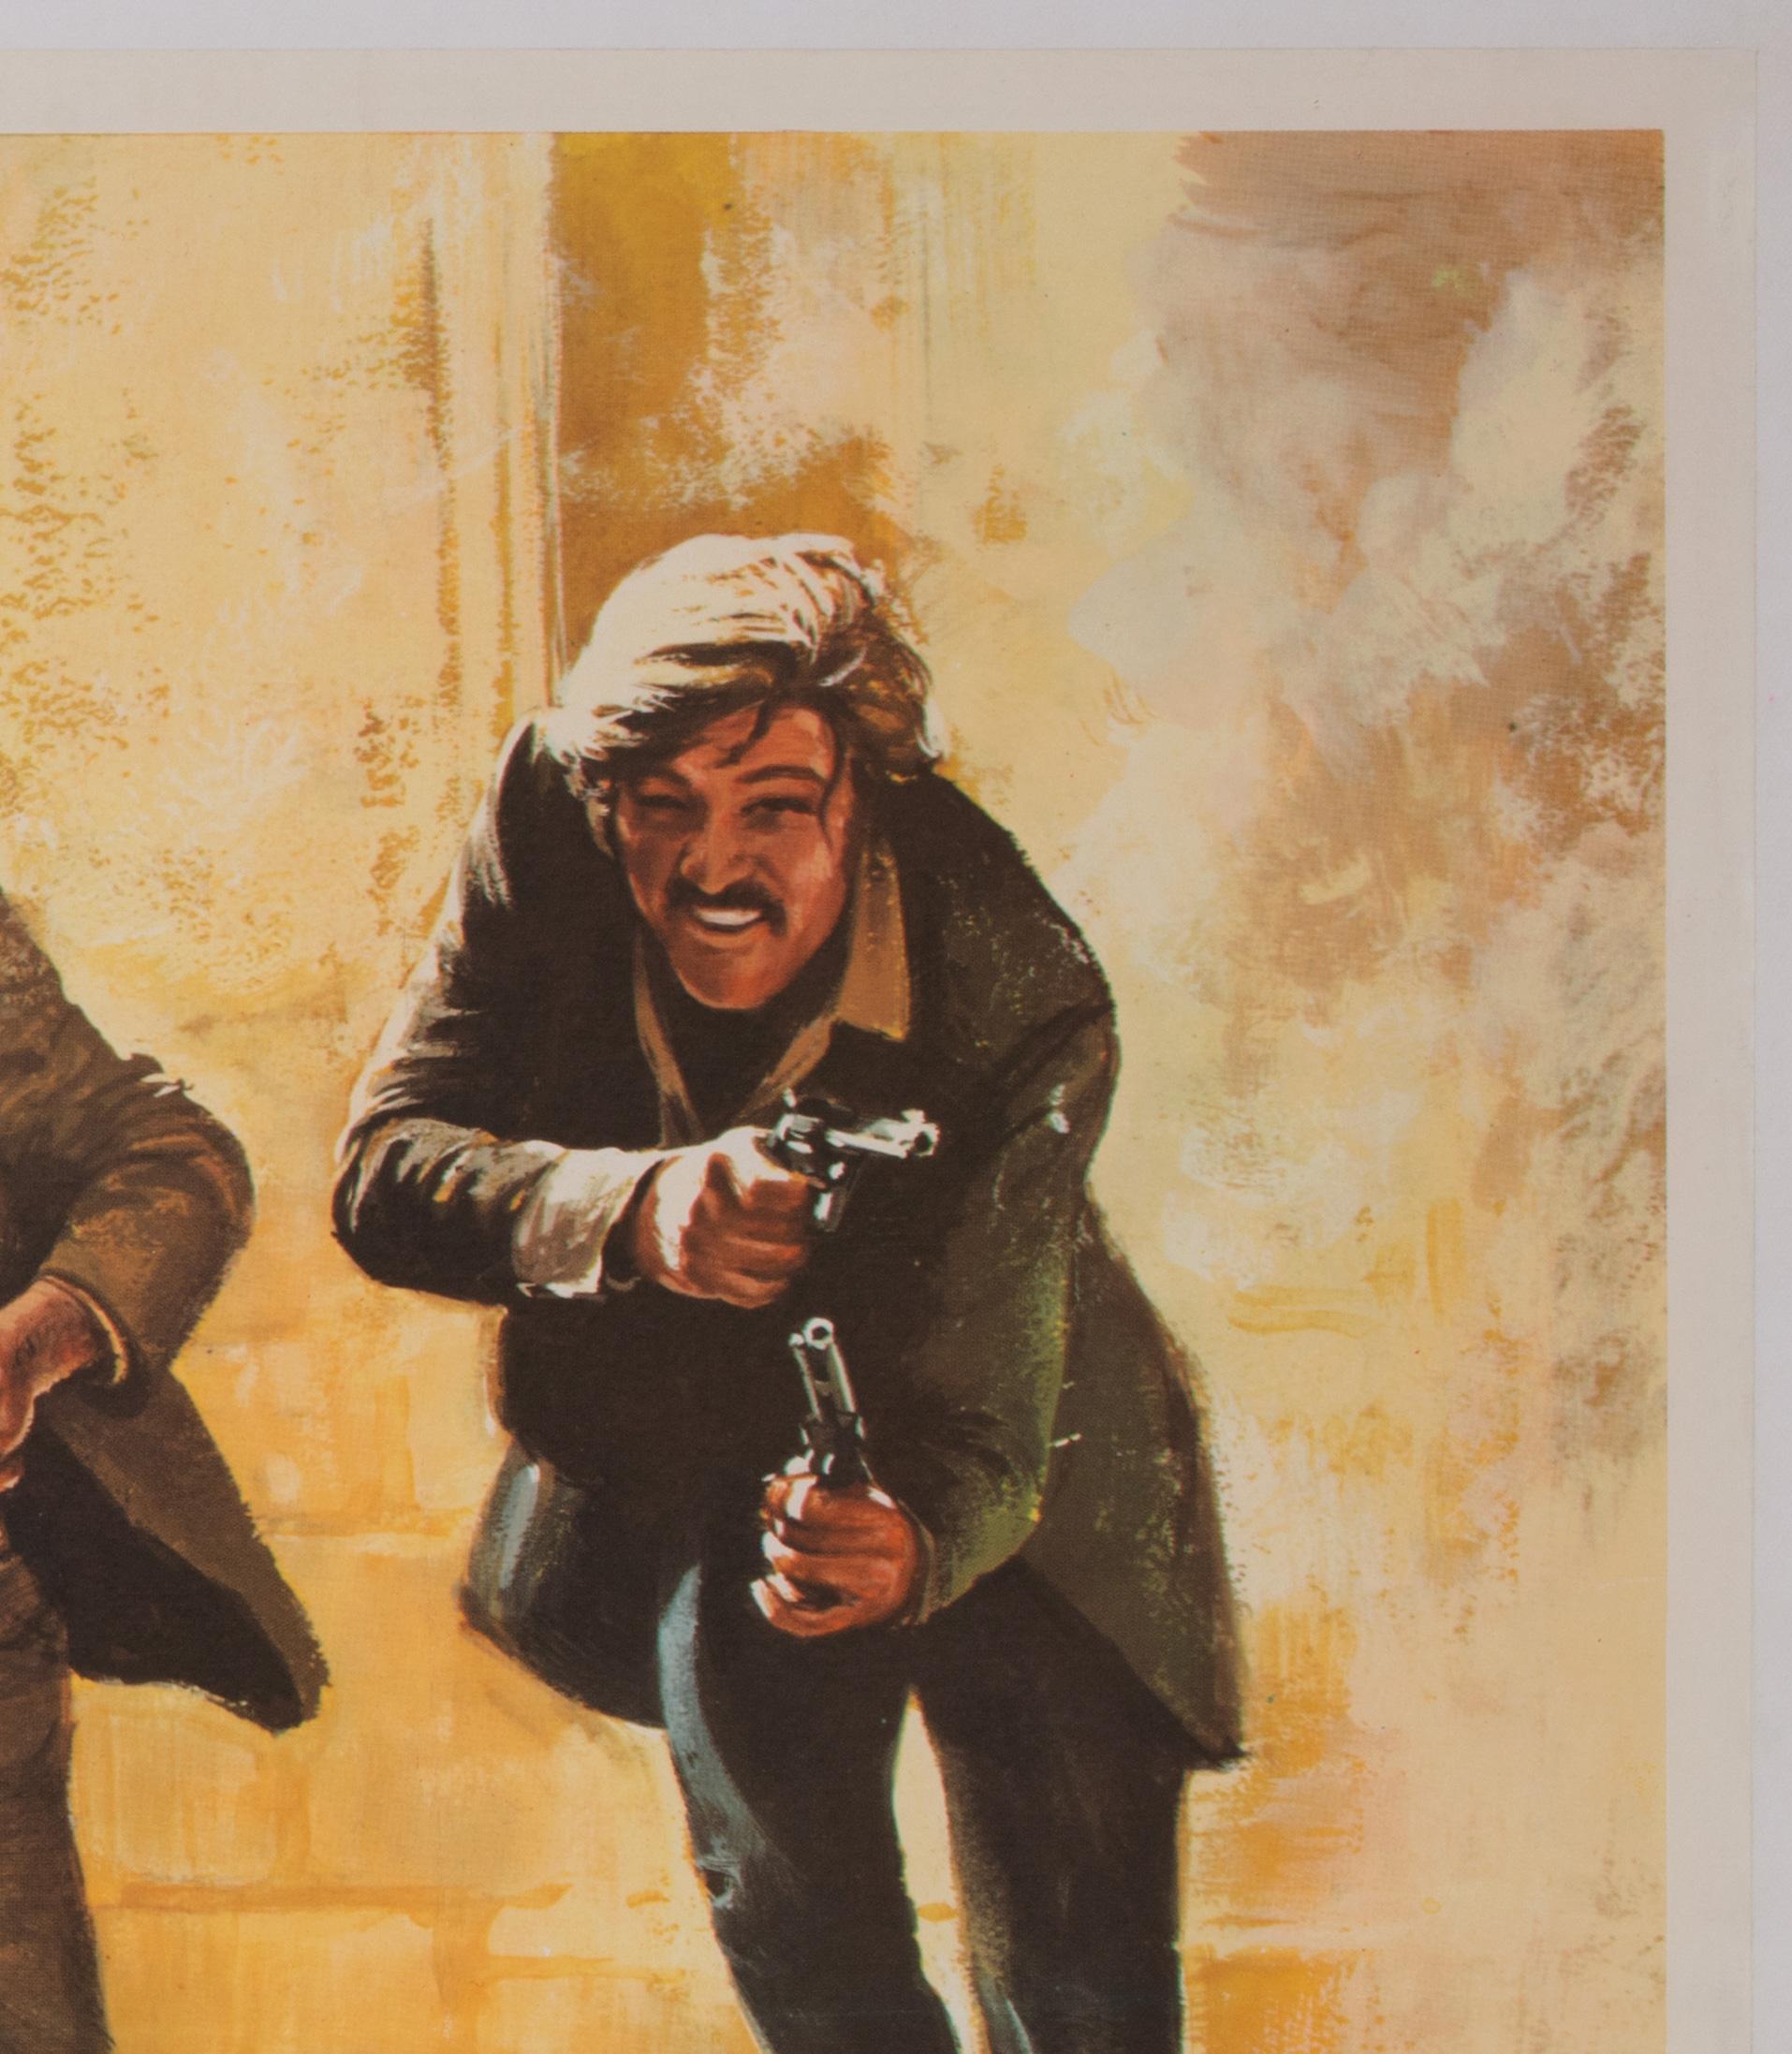 20th Century Butch Cassidy and the Sundance Kid UK Film Movie Poster, Tom Beauvais, 1969 For Sale